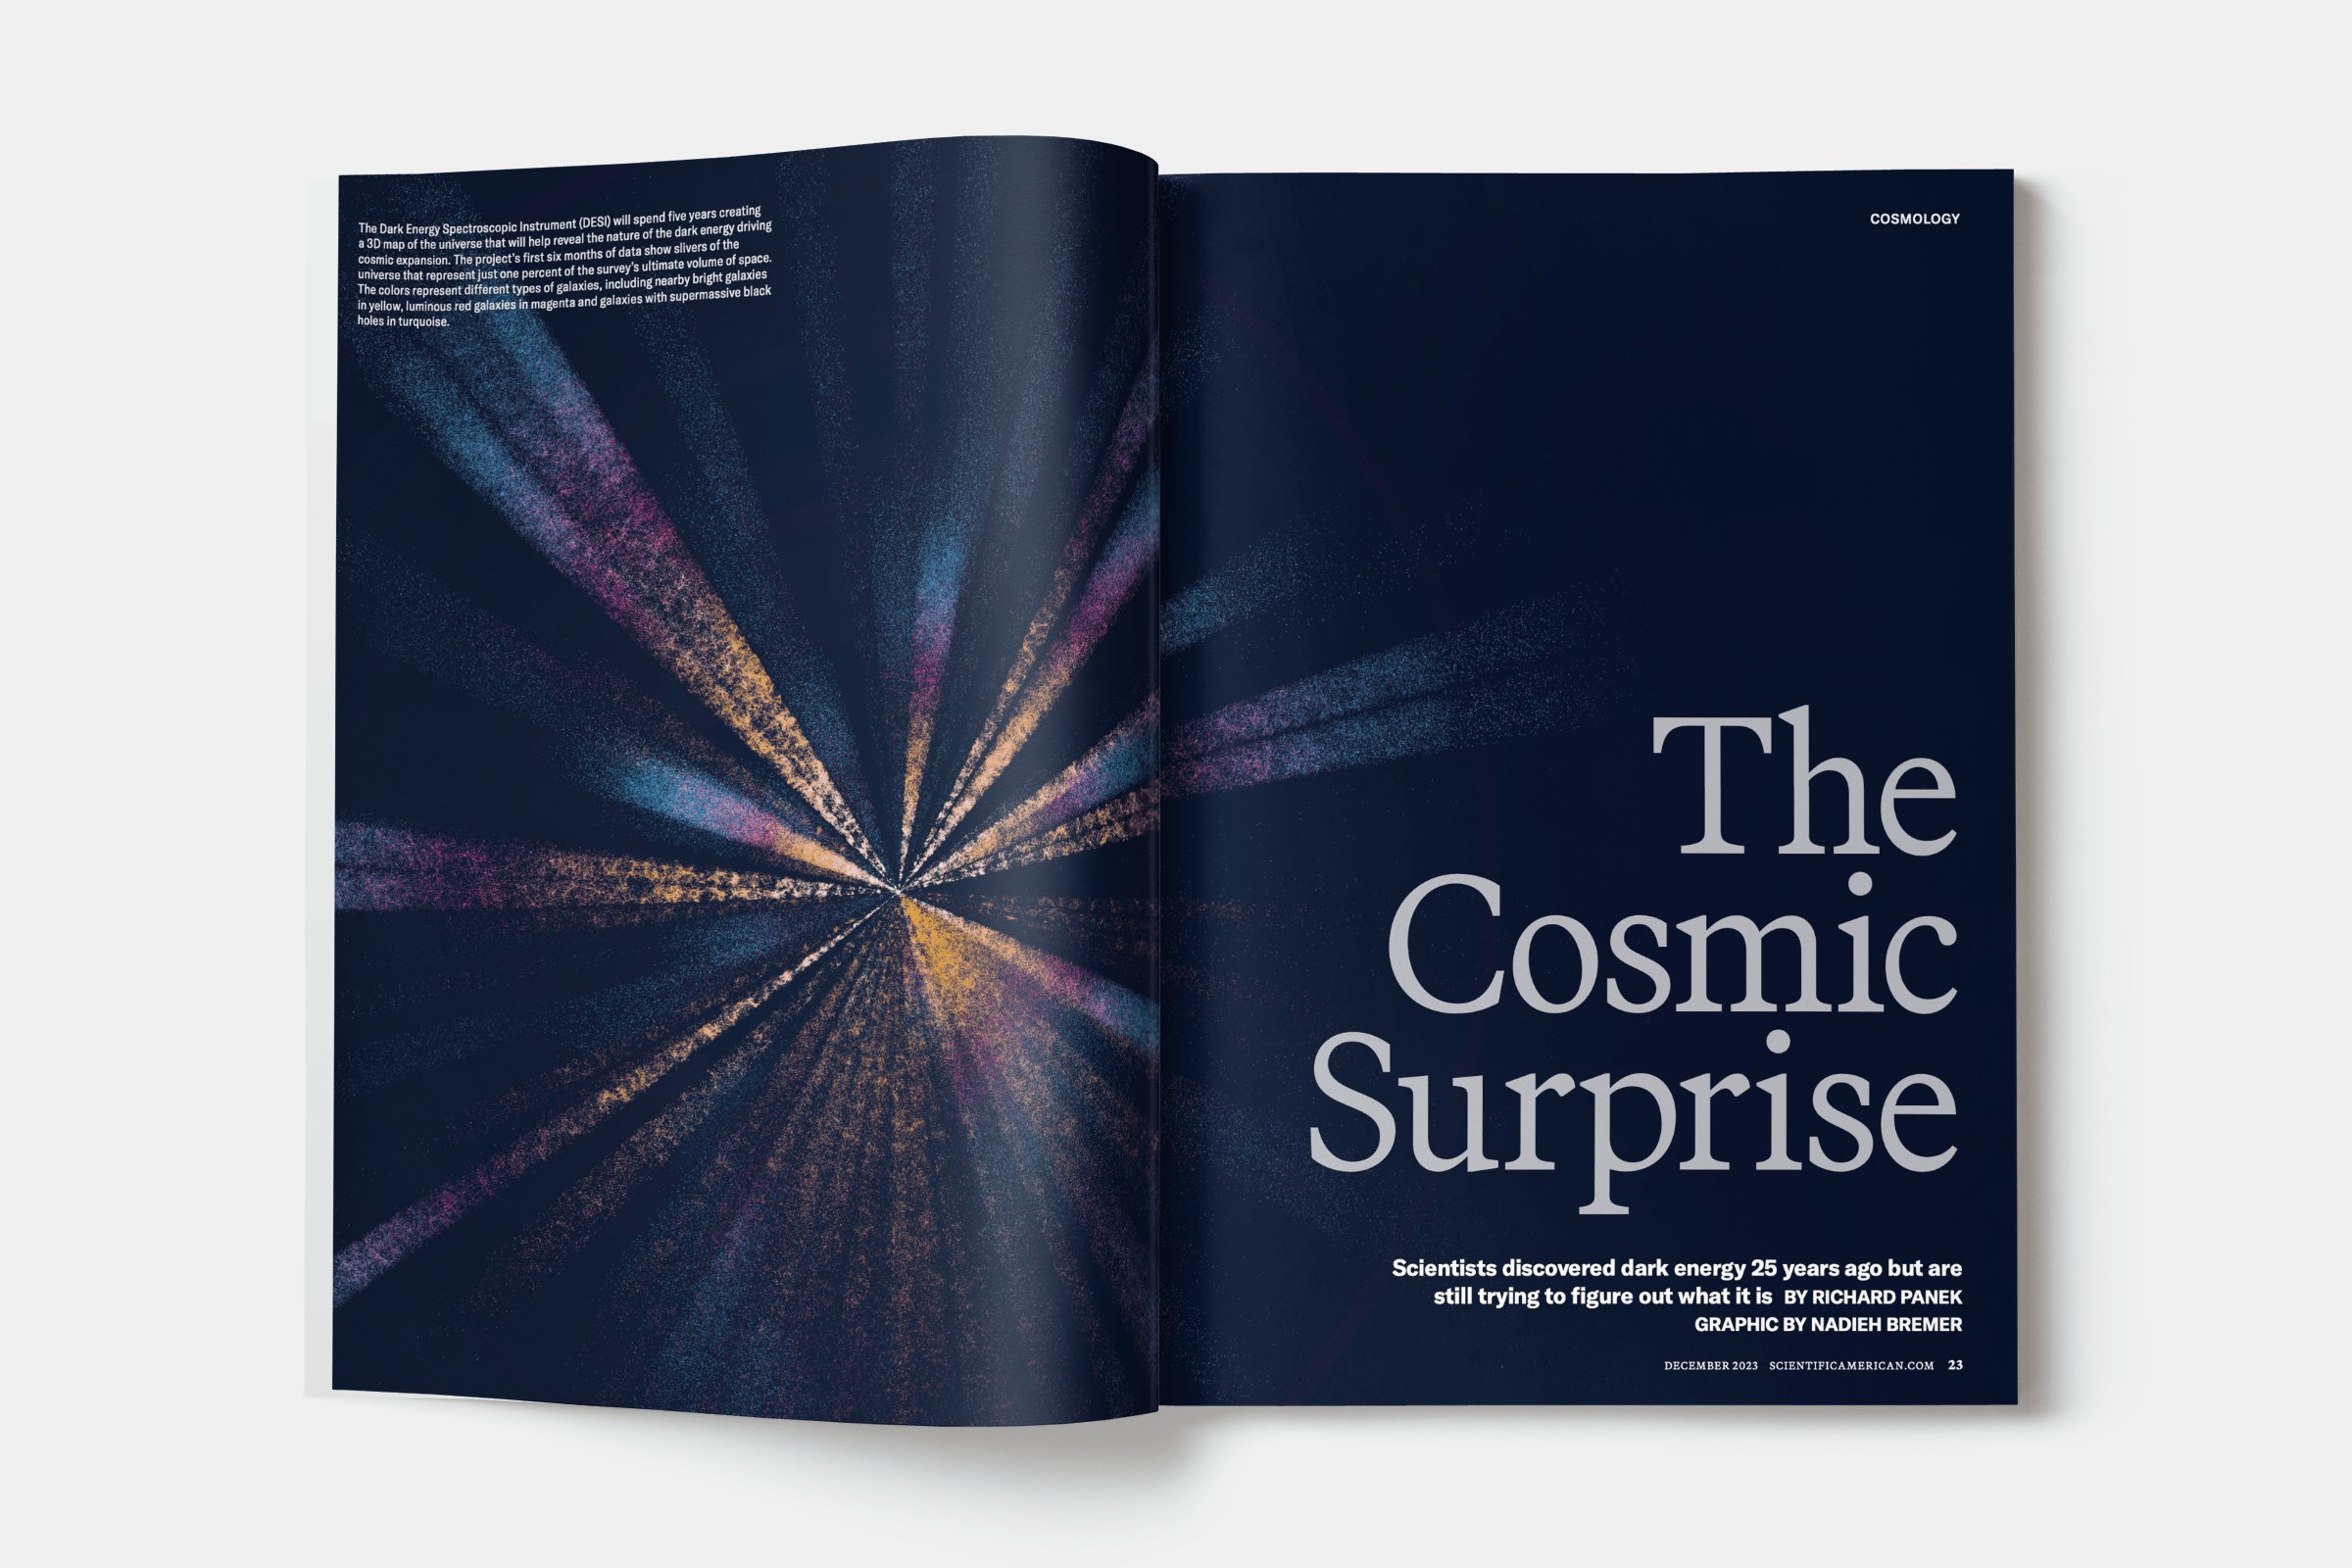 The cover spread of the Scientific American article with the visual on the left page